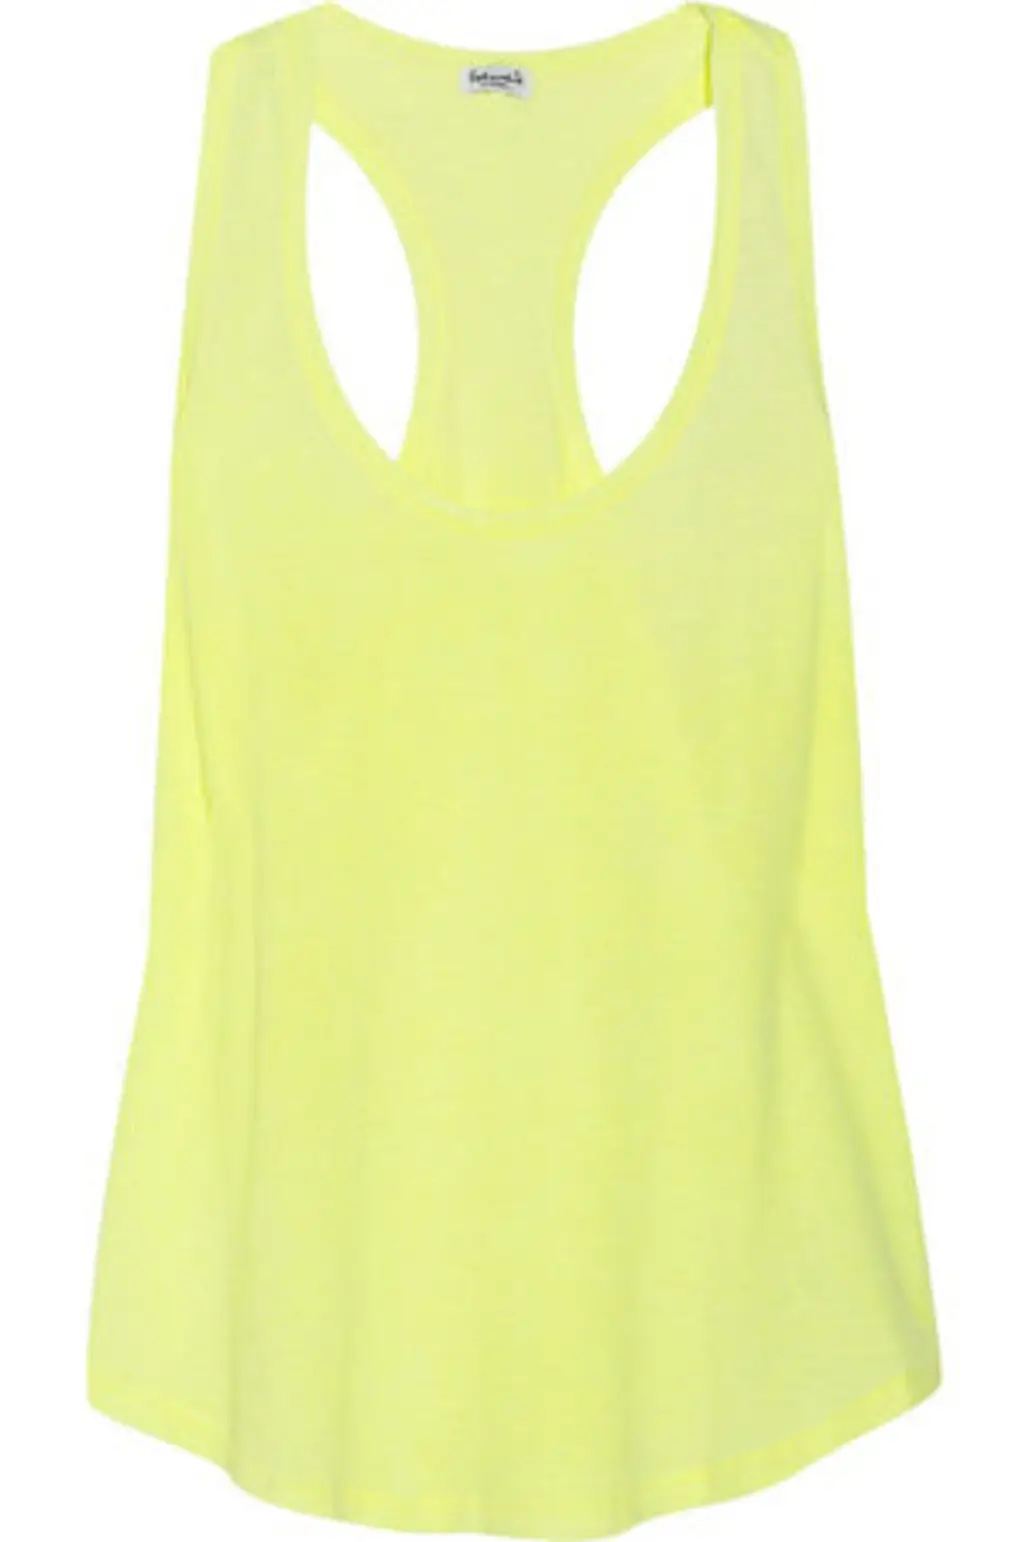 7 Slouchy Tank Tops ...